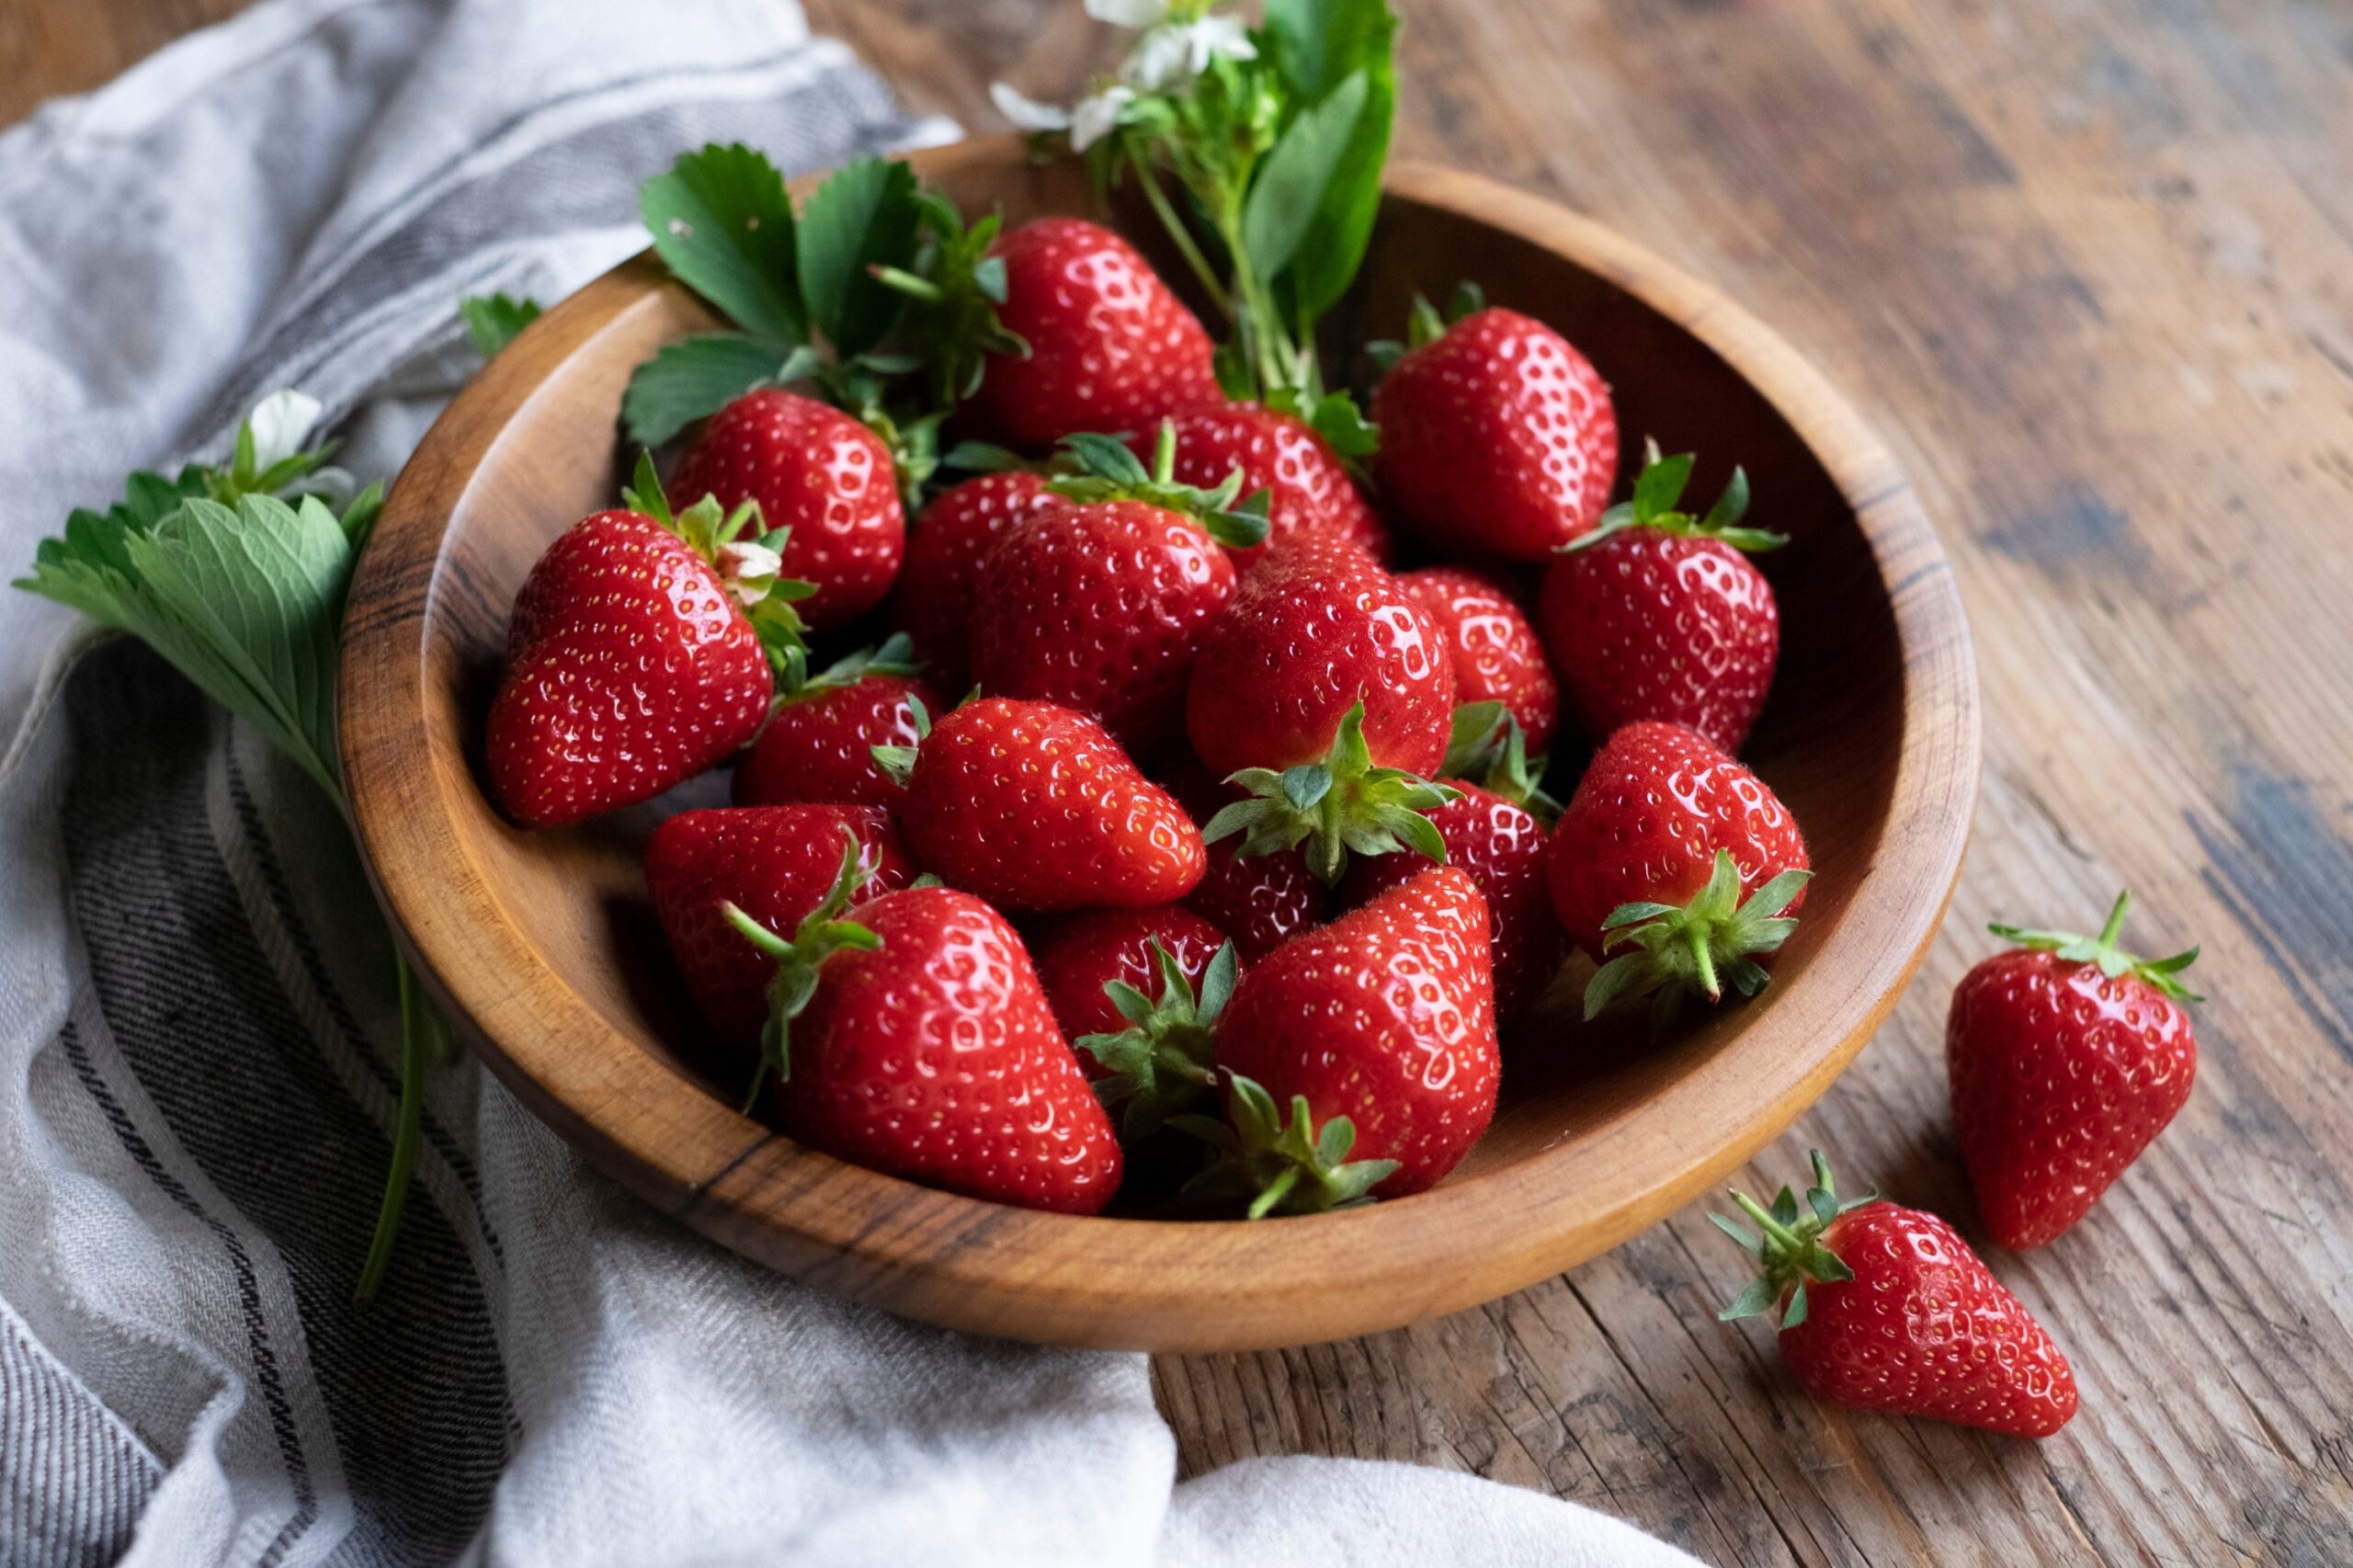 Strawberries Are Useful For Numerous Purposes.